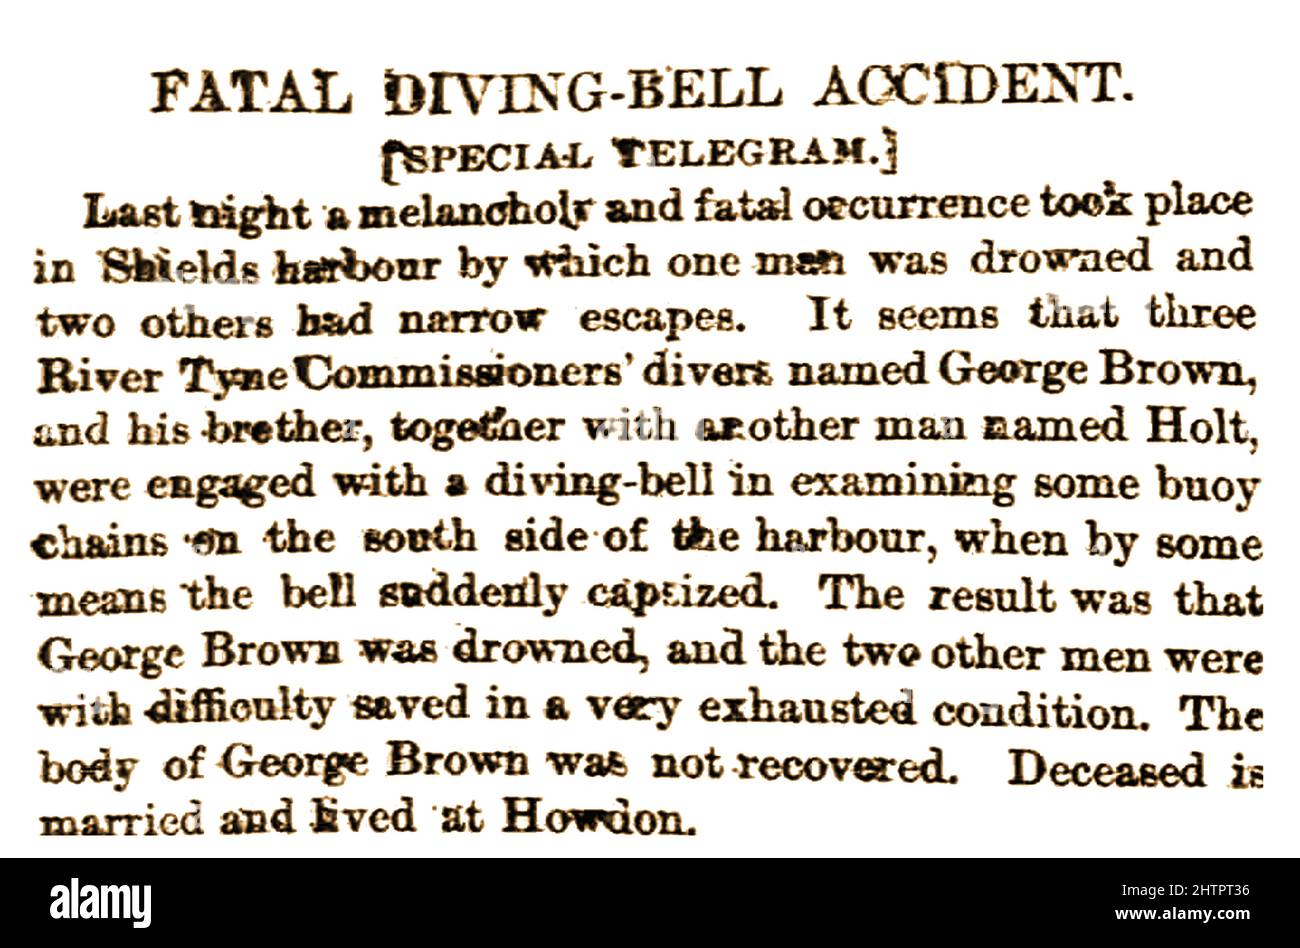 FATAL DIVING BELL ACCIDENT - Clip from the Bradford Observer (UK) newspaper July 22nd 1873. reporting the death of diver George Brown in a diving bell accident in the Tyne river in Shields harbour. Stock Photo